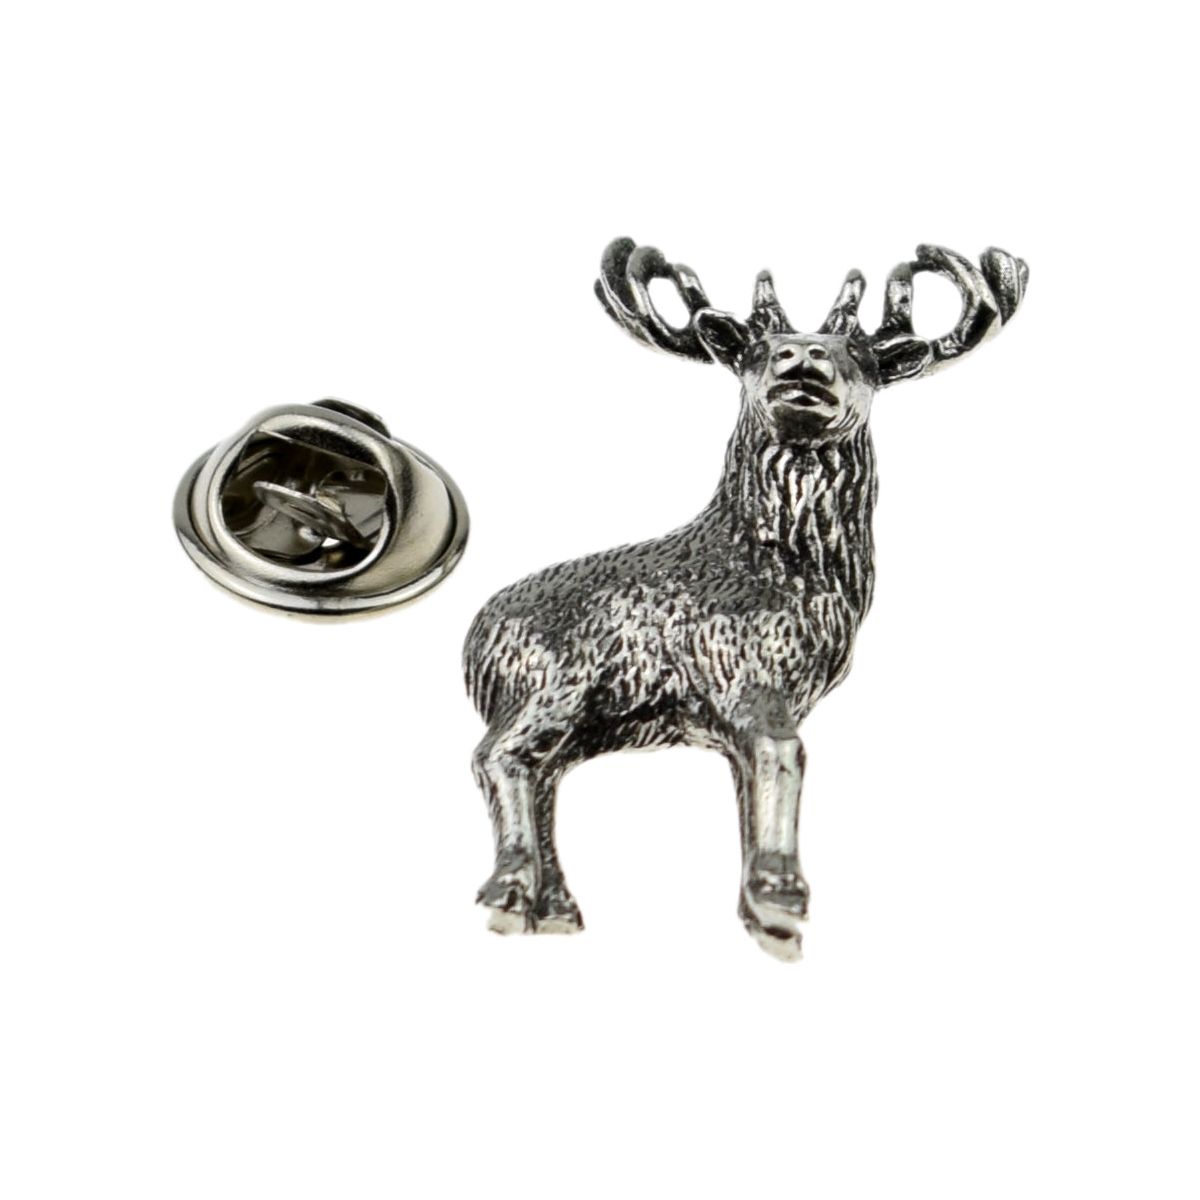 Standing Stag Pewter Lapel Pin Badge - Ashton and Finch